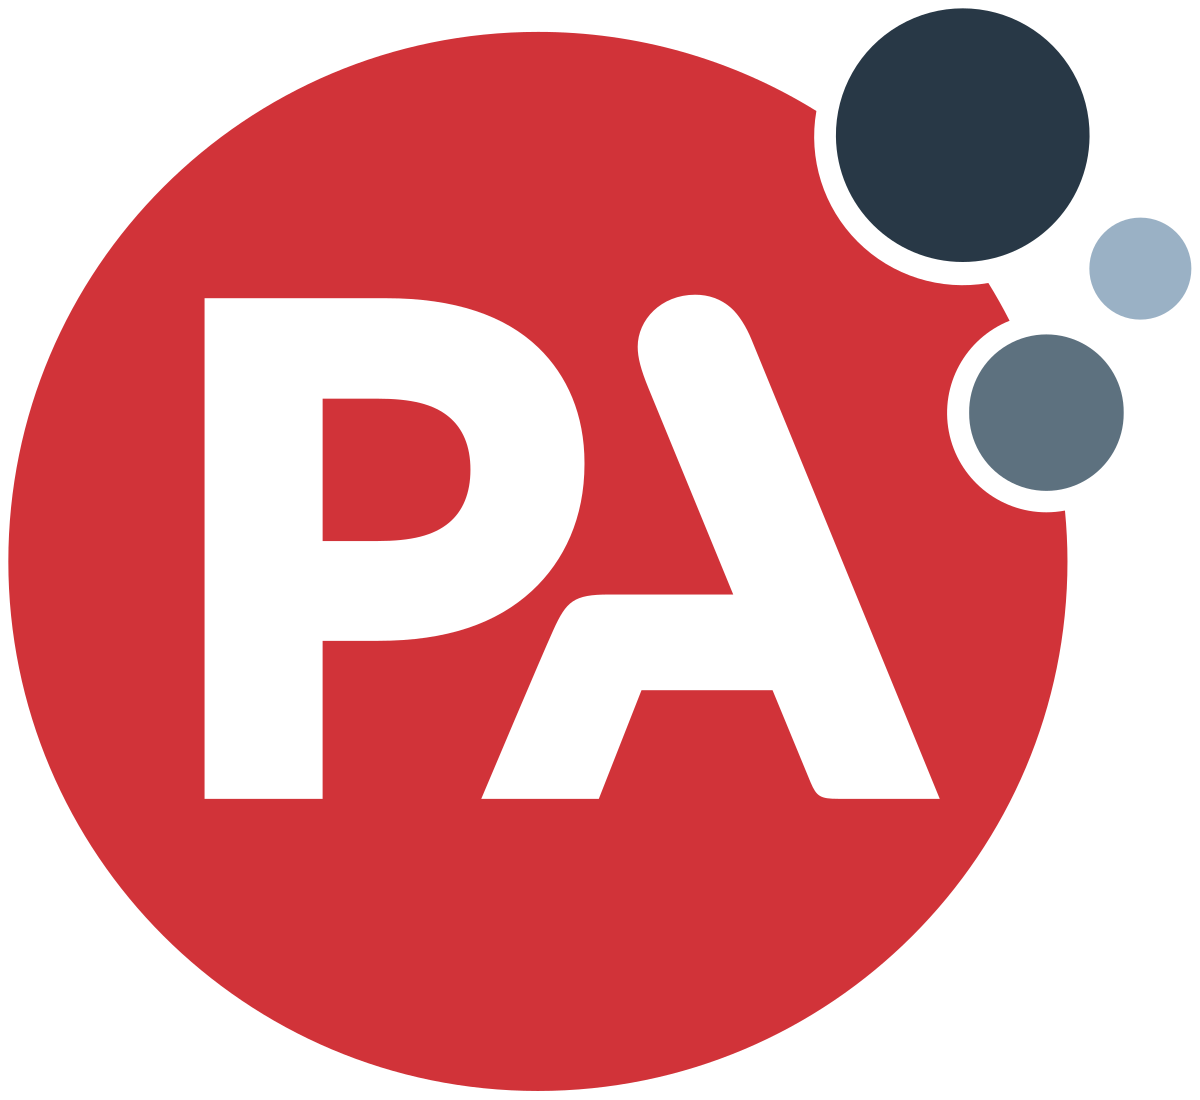 PA Consulting founded the PA Foundation to develop and inspire future leaders in science